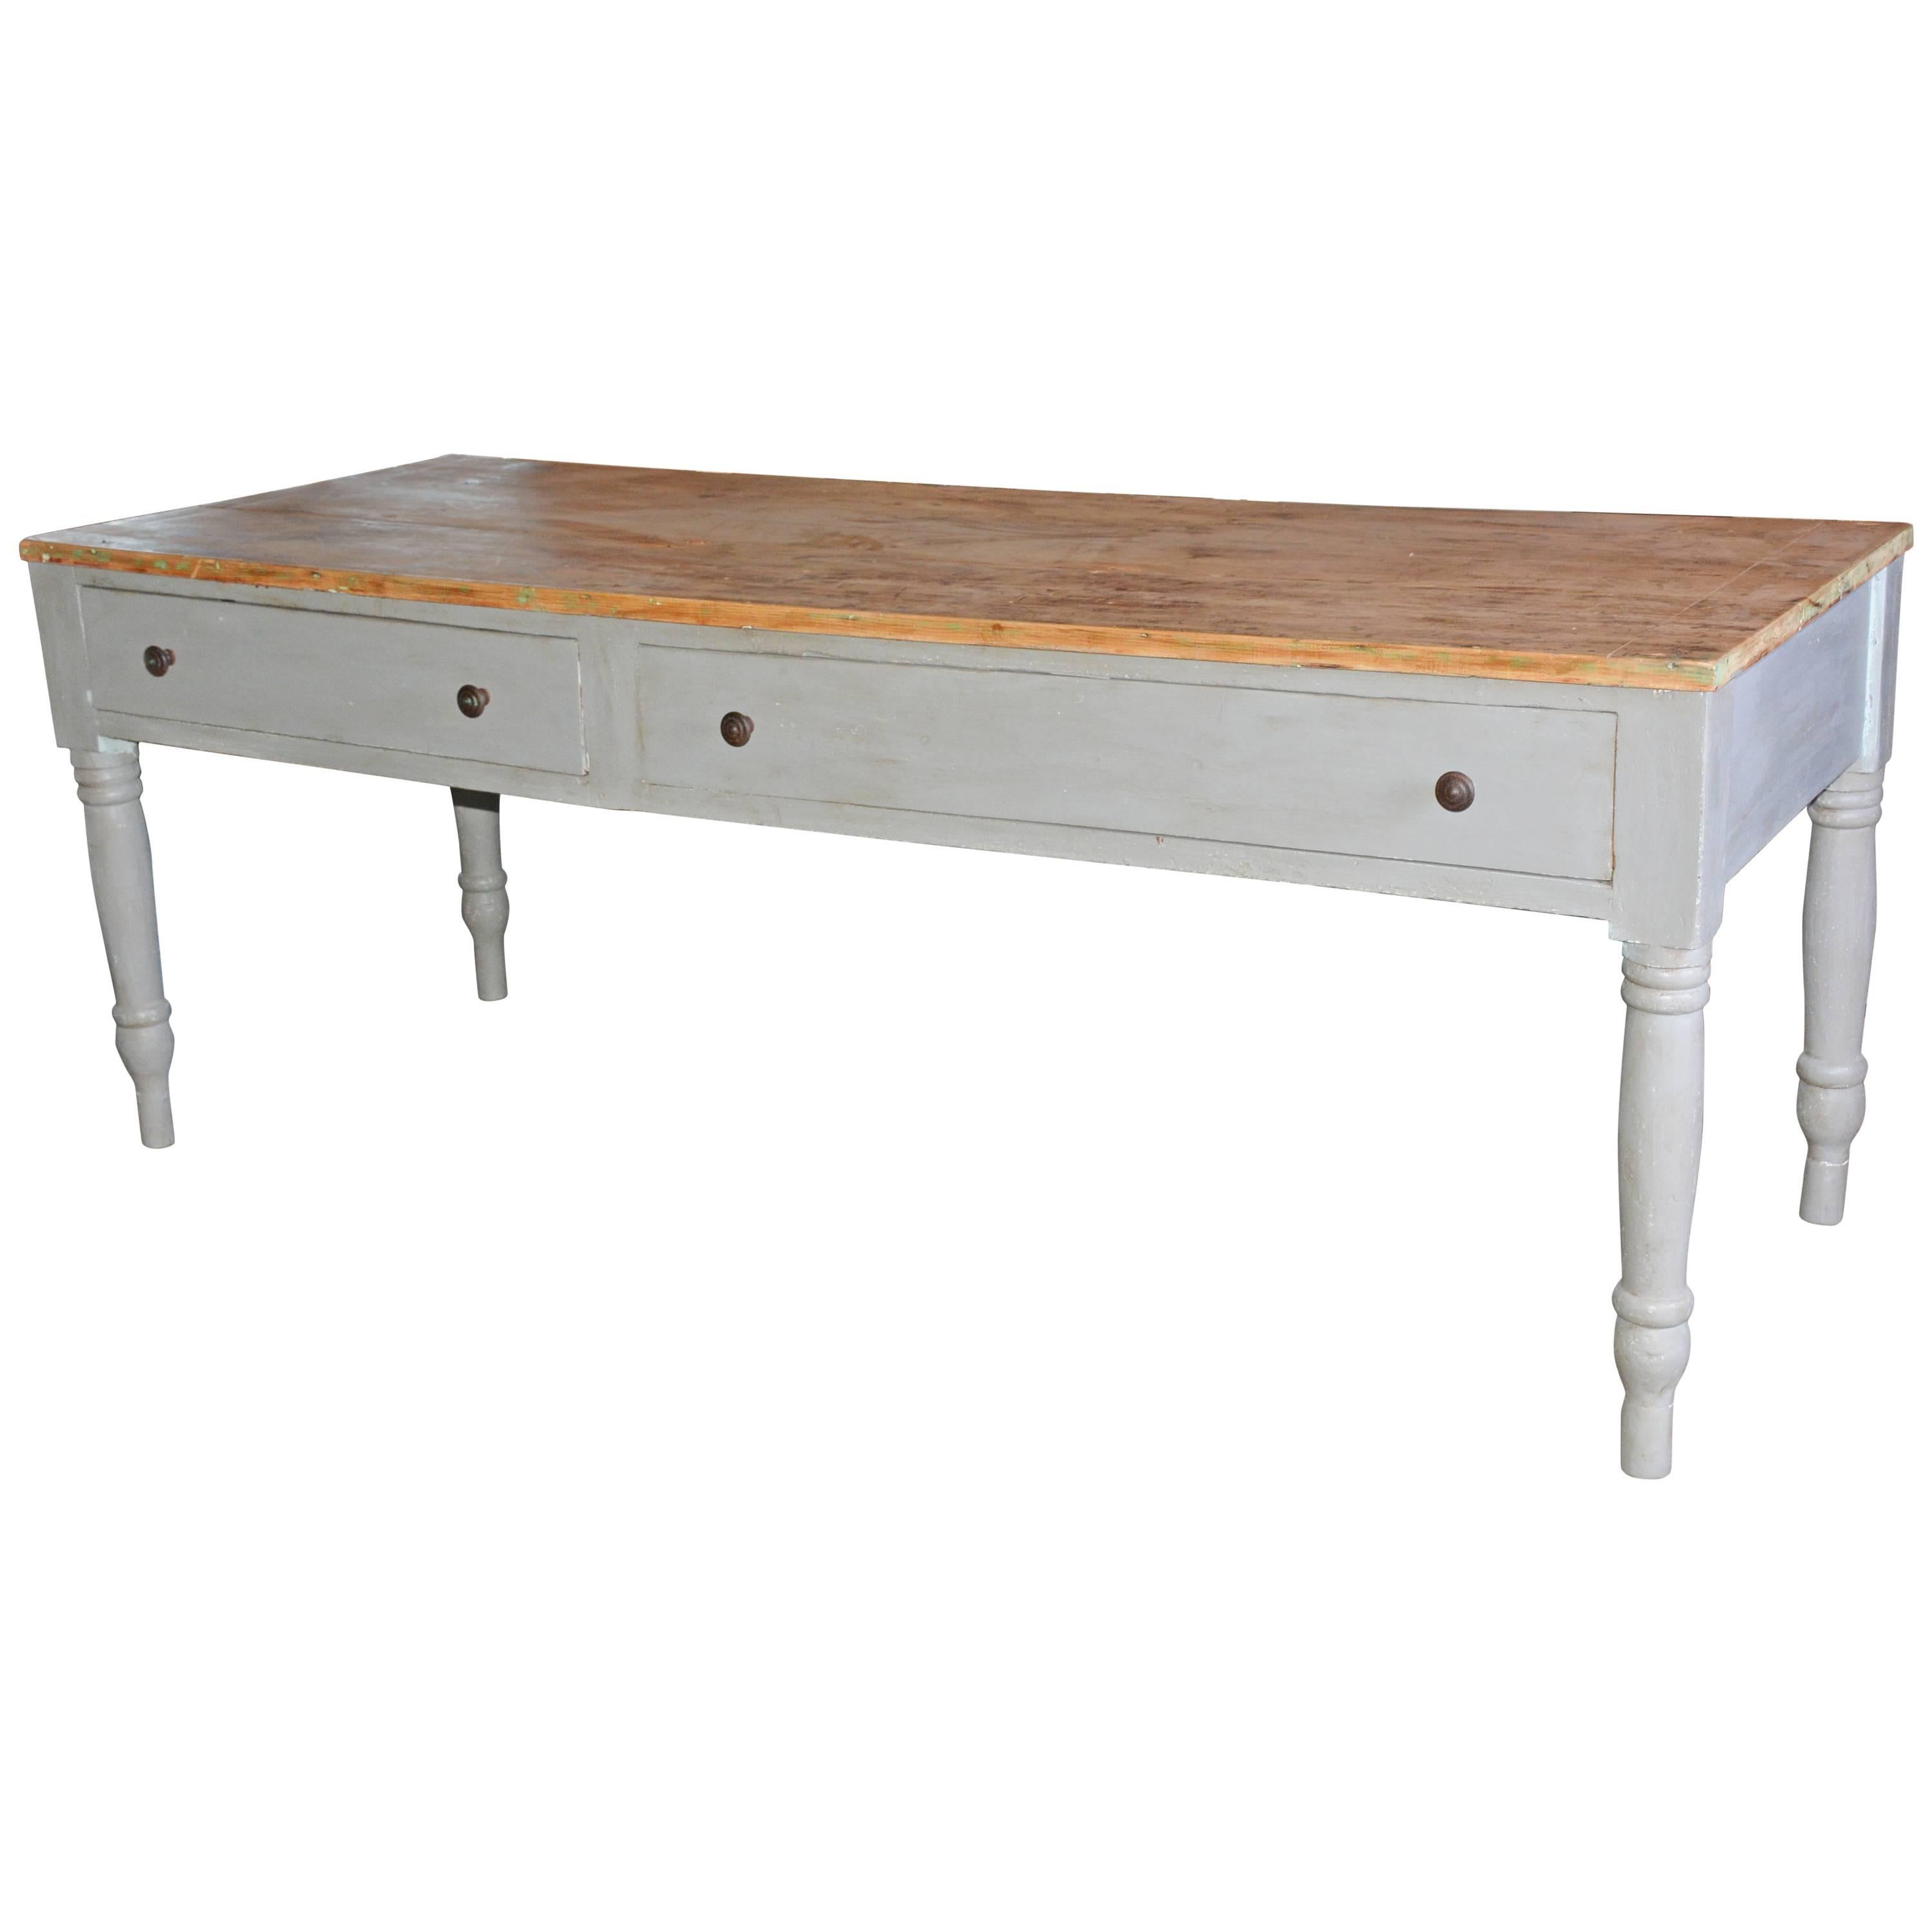 Country Work Table or Kitchen Island